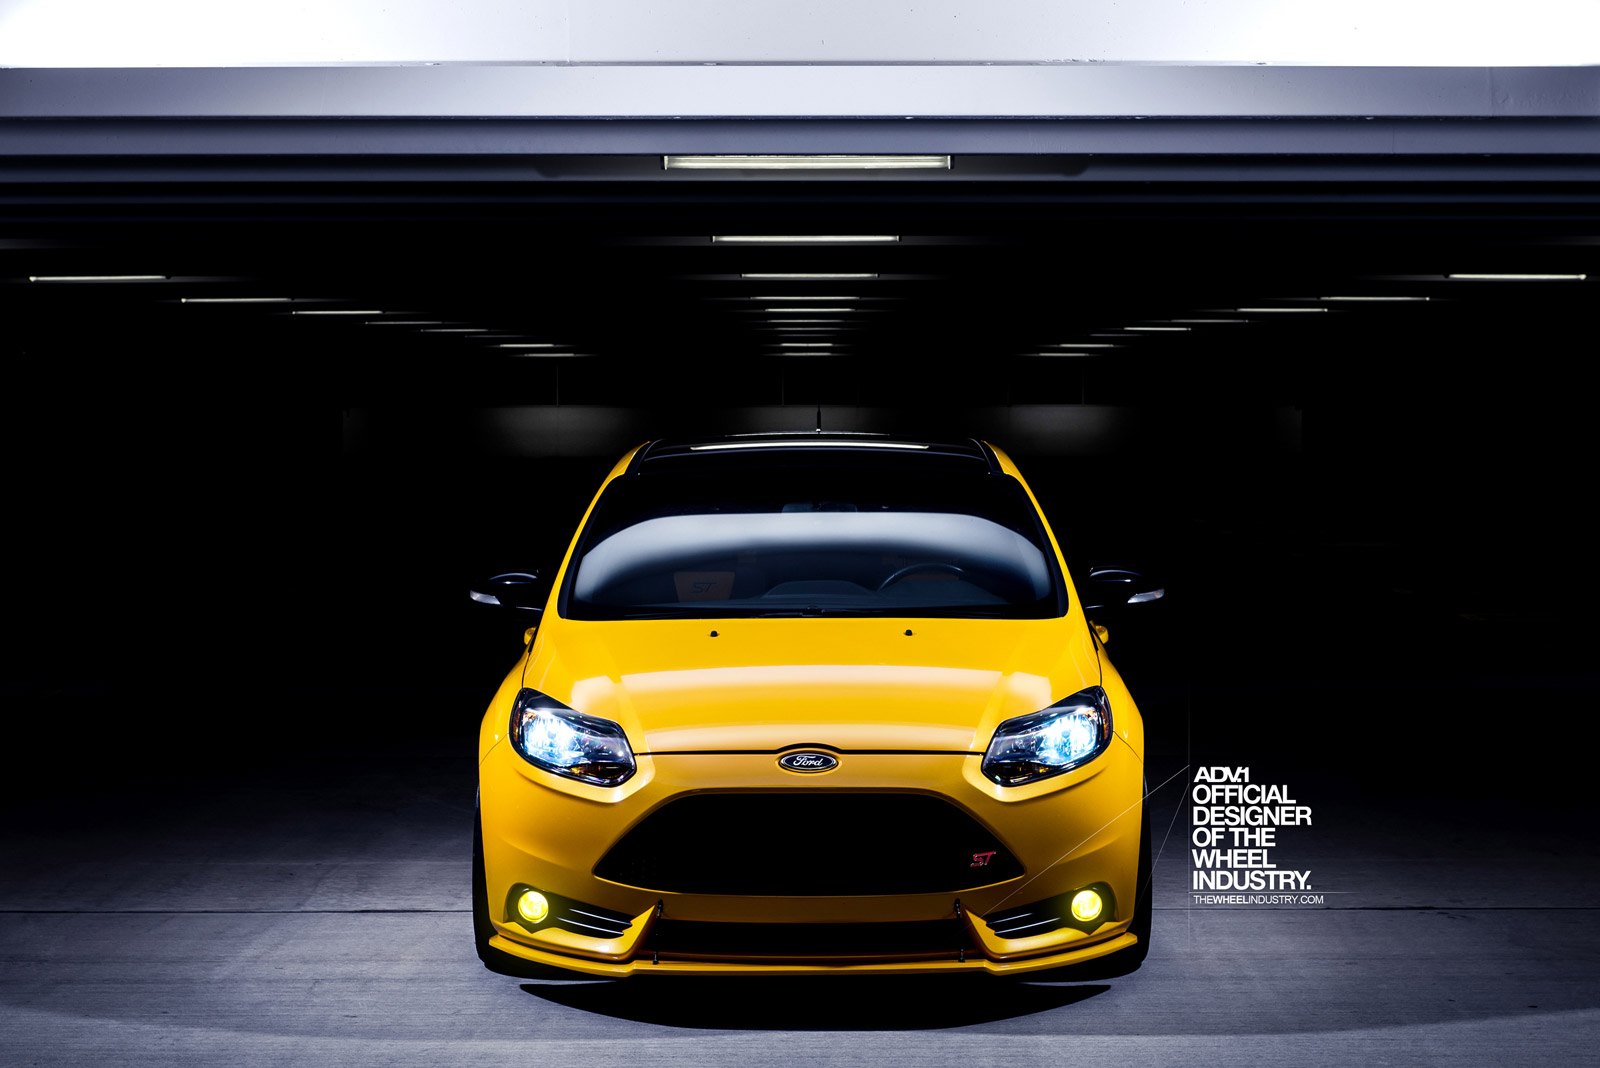 Yellow LED Fog Lights on Yellow Matte Ford Fiesta - Photo by ADV.1